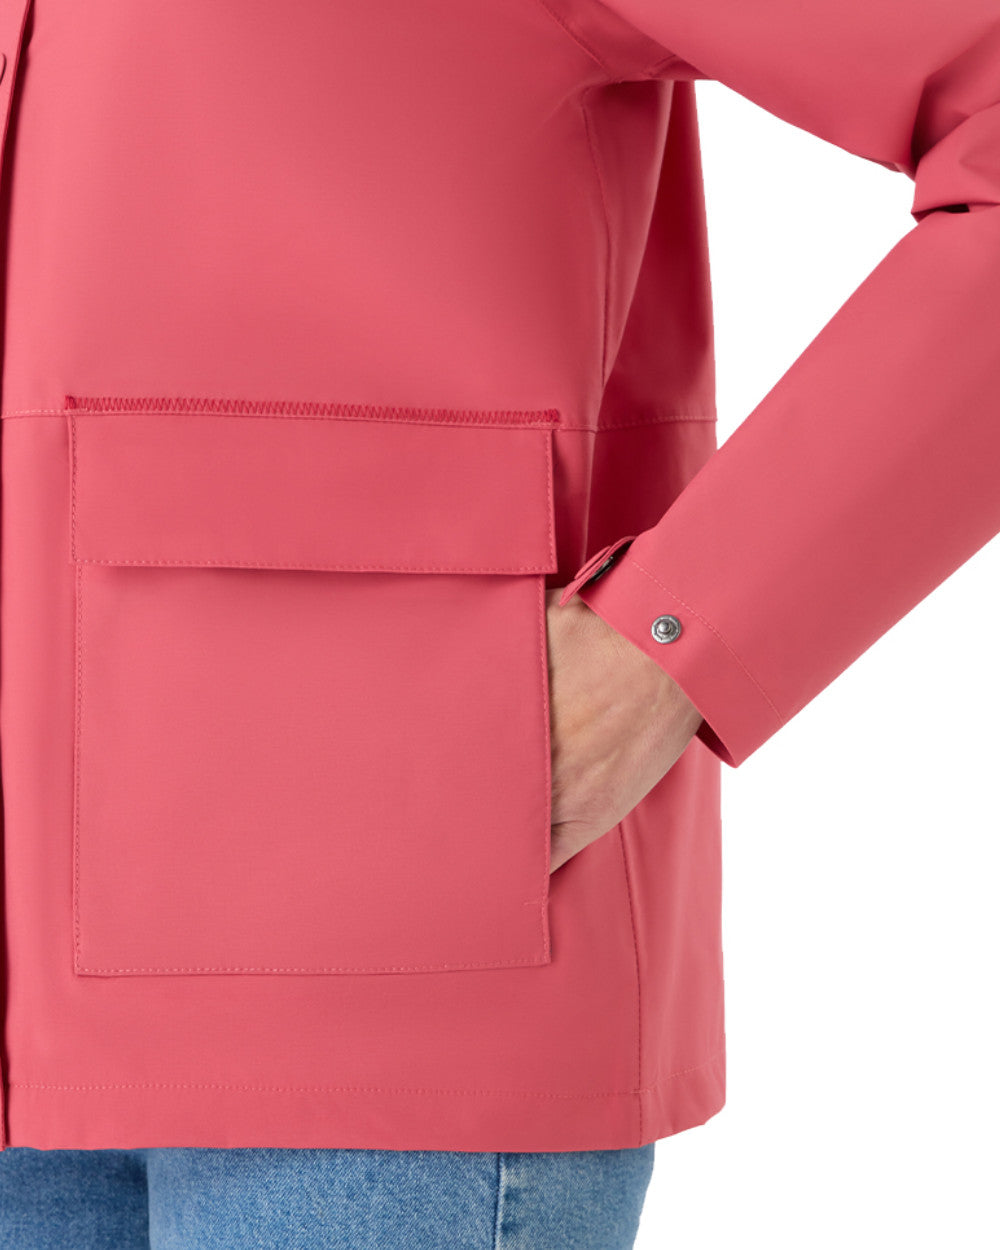 Sweet Raspberry Coloured Musto Womens Classic Shore Waterproof Jacket On A White Background 